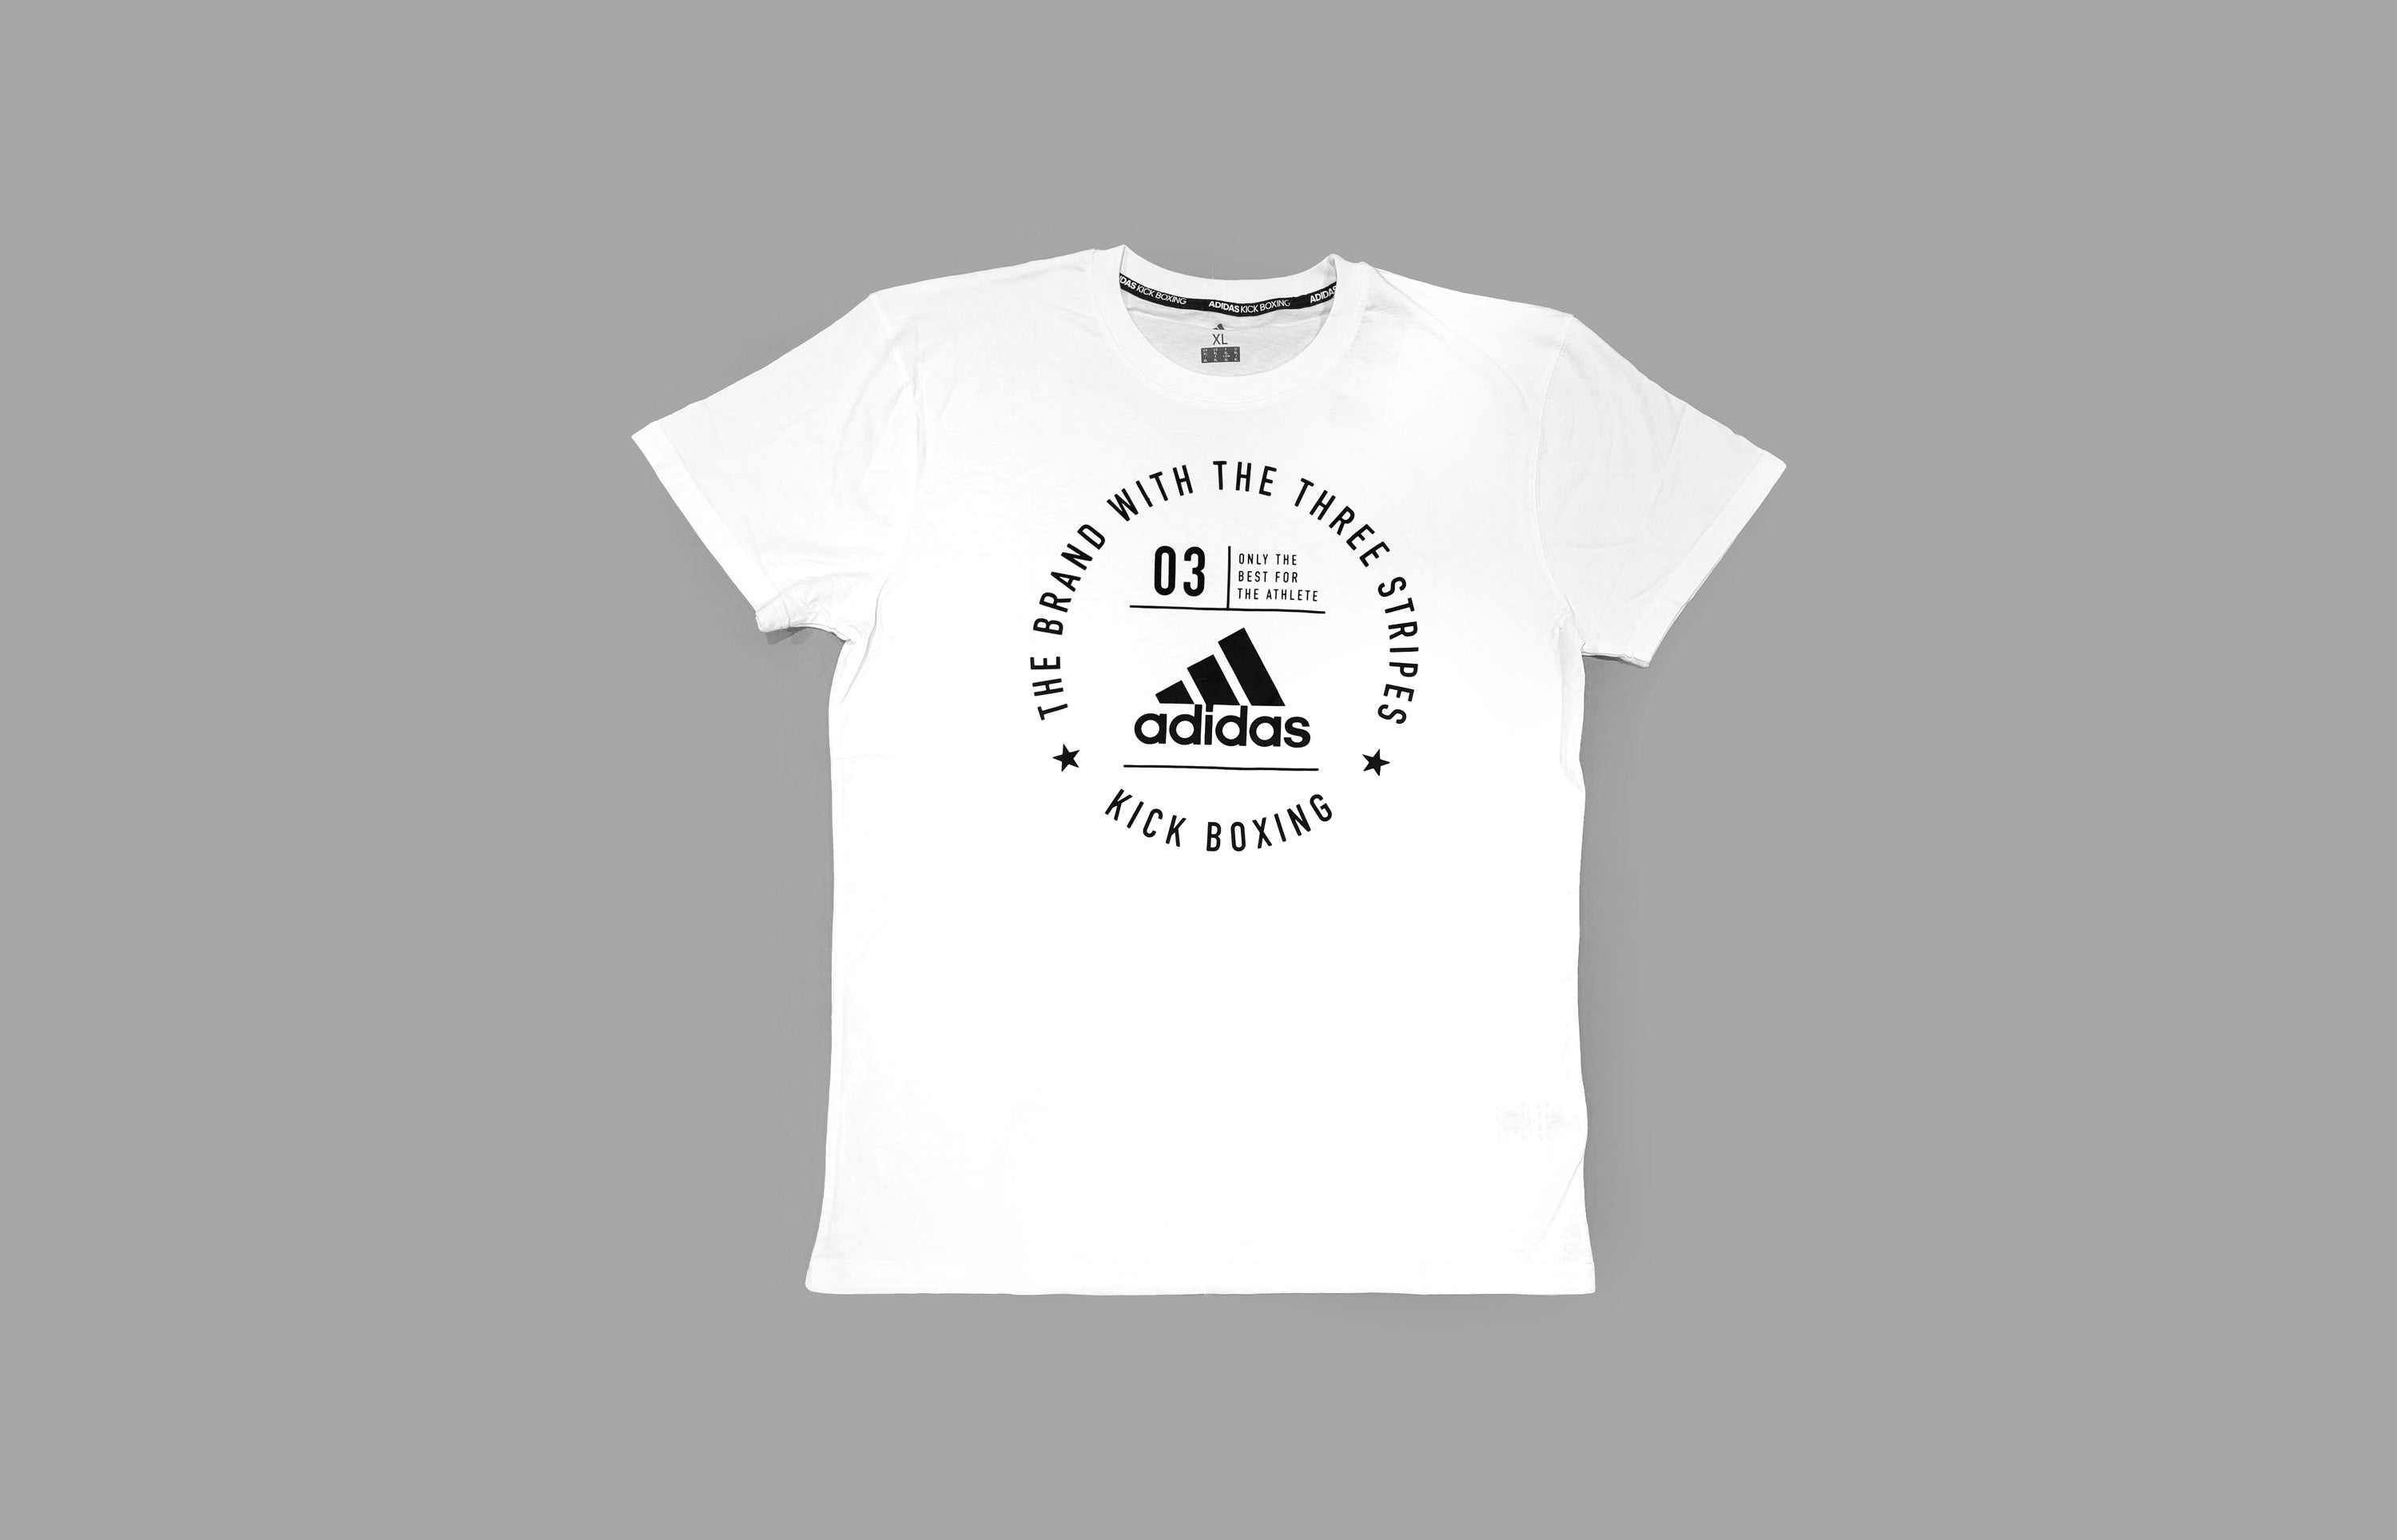 Adidas Community Kickboxing T-Shirt, perfect for at the gym or during everyday activities.